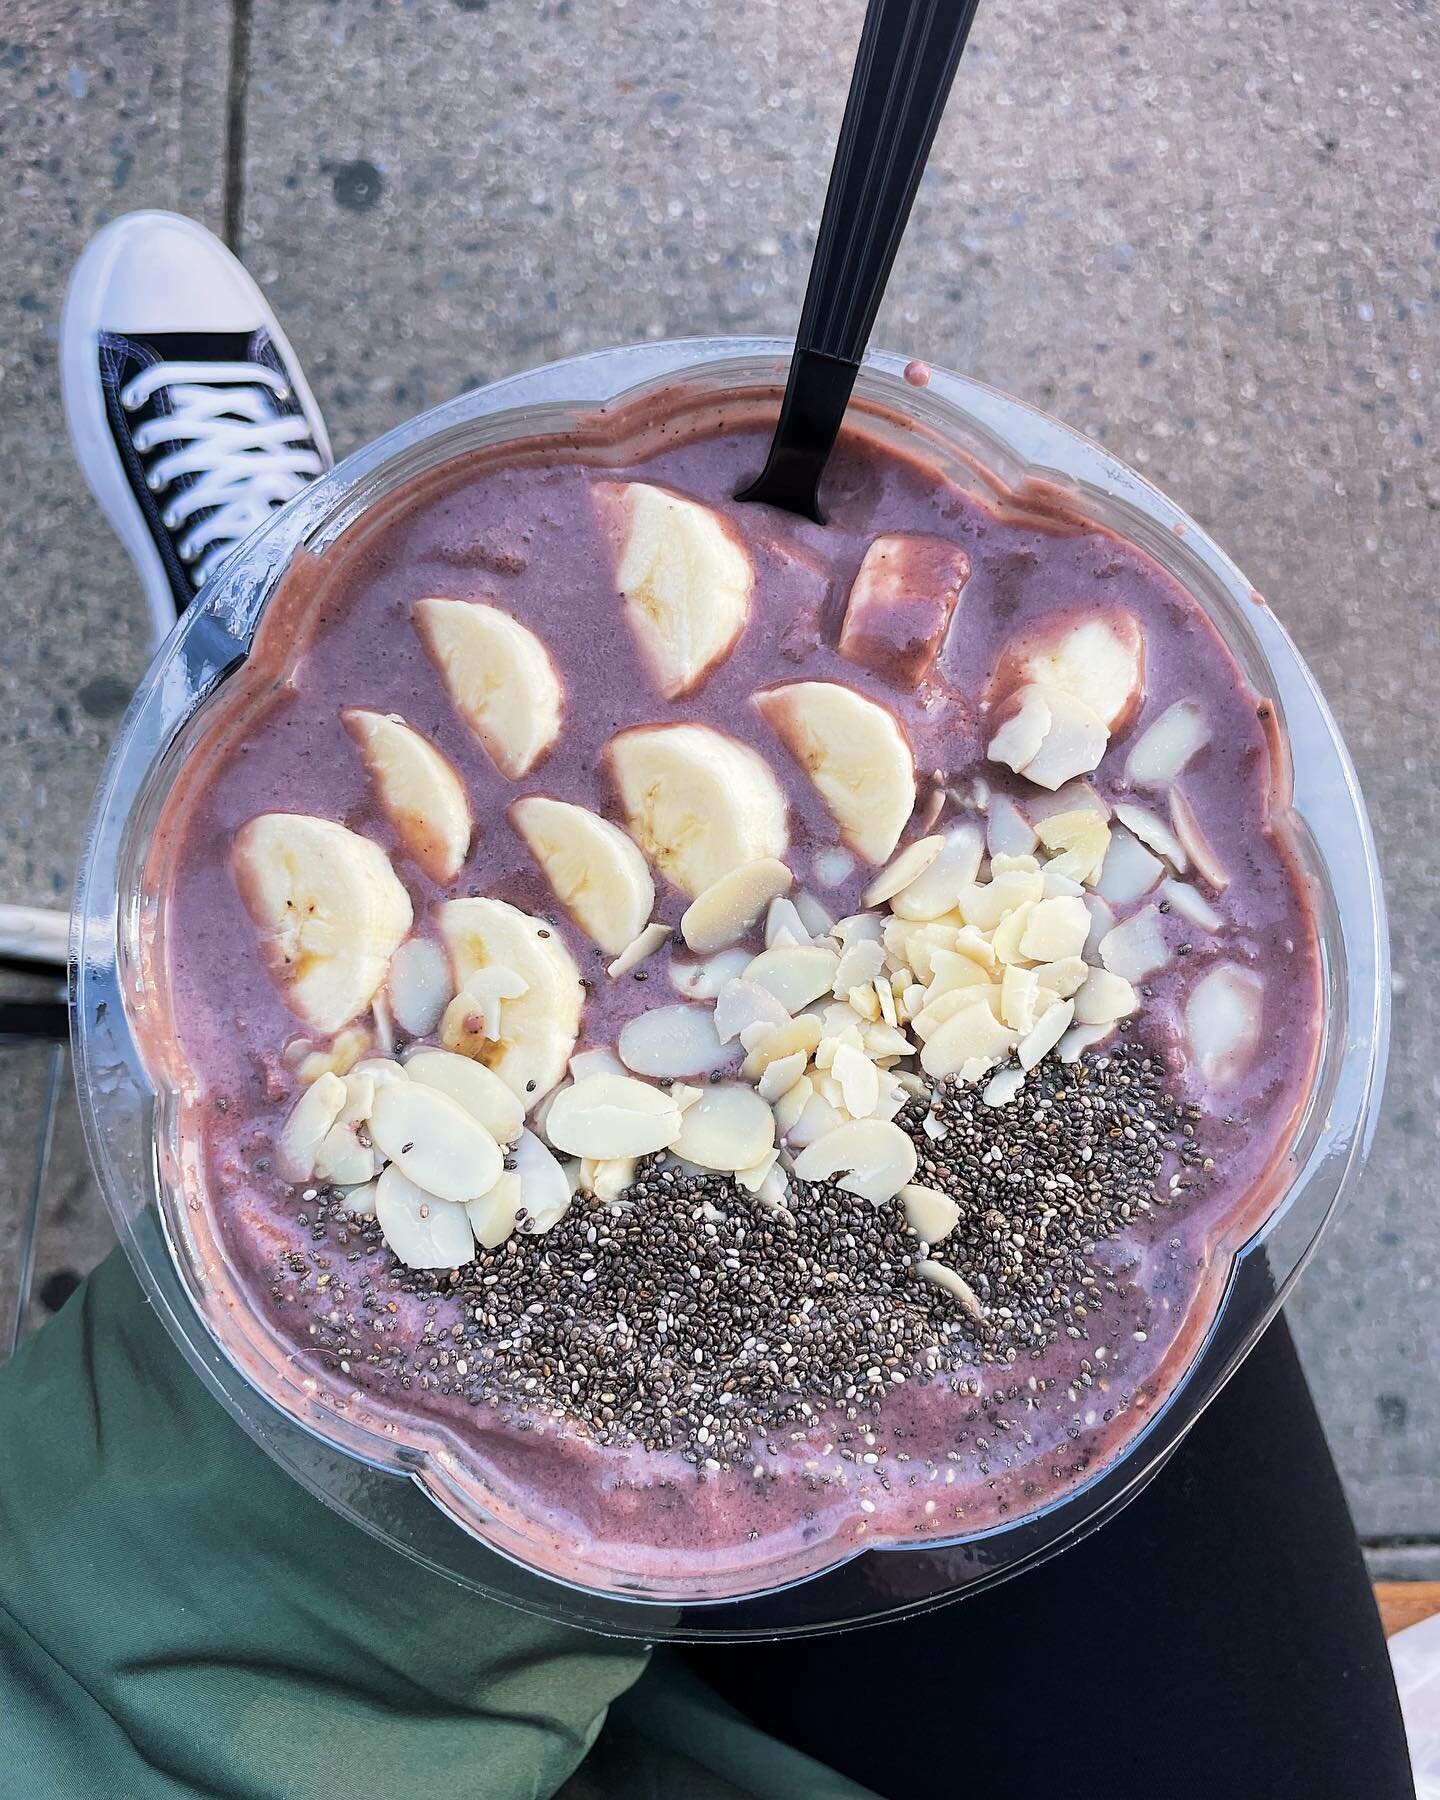 Took myself on a smoothie bowl lunch date before my trip to Trader Joe&rsquo;s, aka the best part of the weekend. Marketeria recently opened on First Ave between 64th and 65th, and it has lots of gourmet pantry staples plus a smoothie and a&ccedil;a&